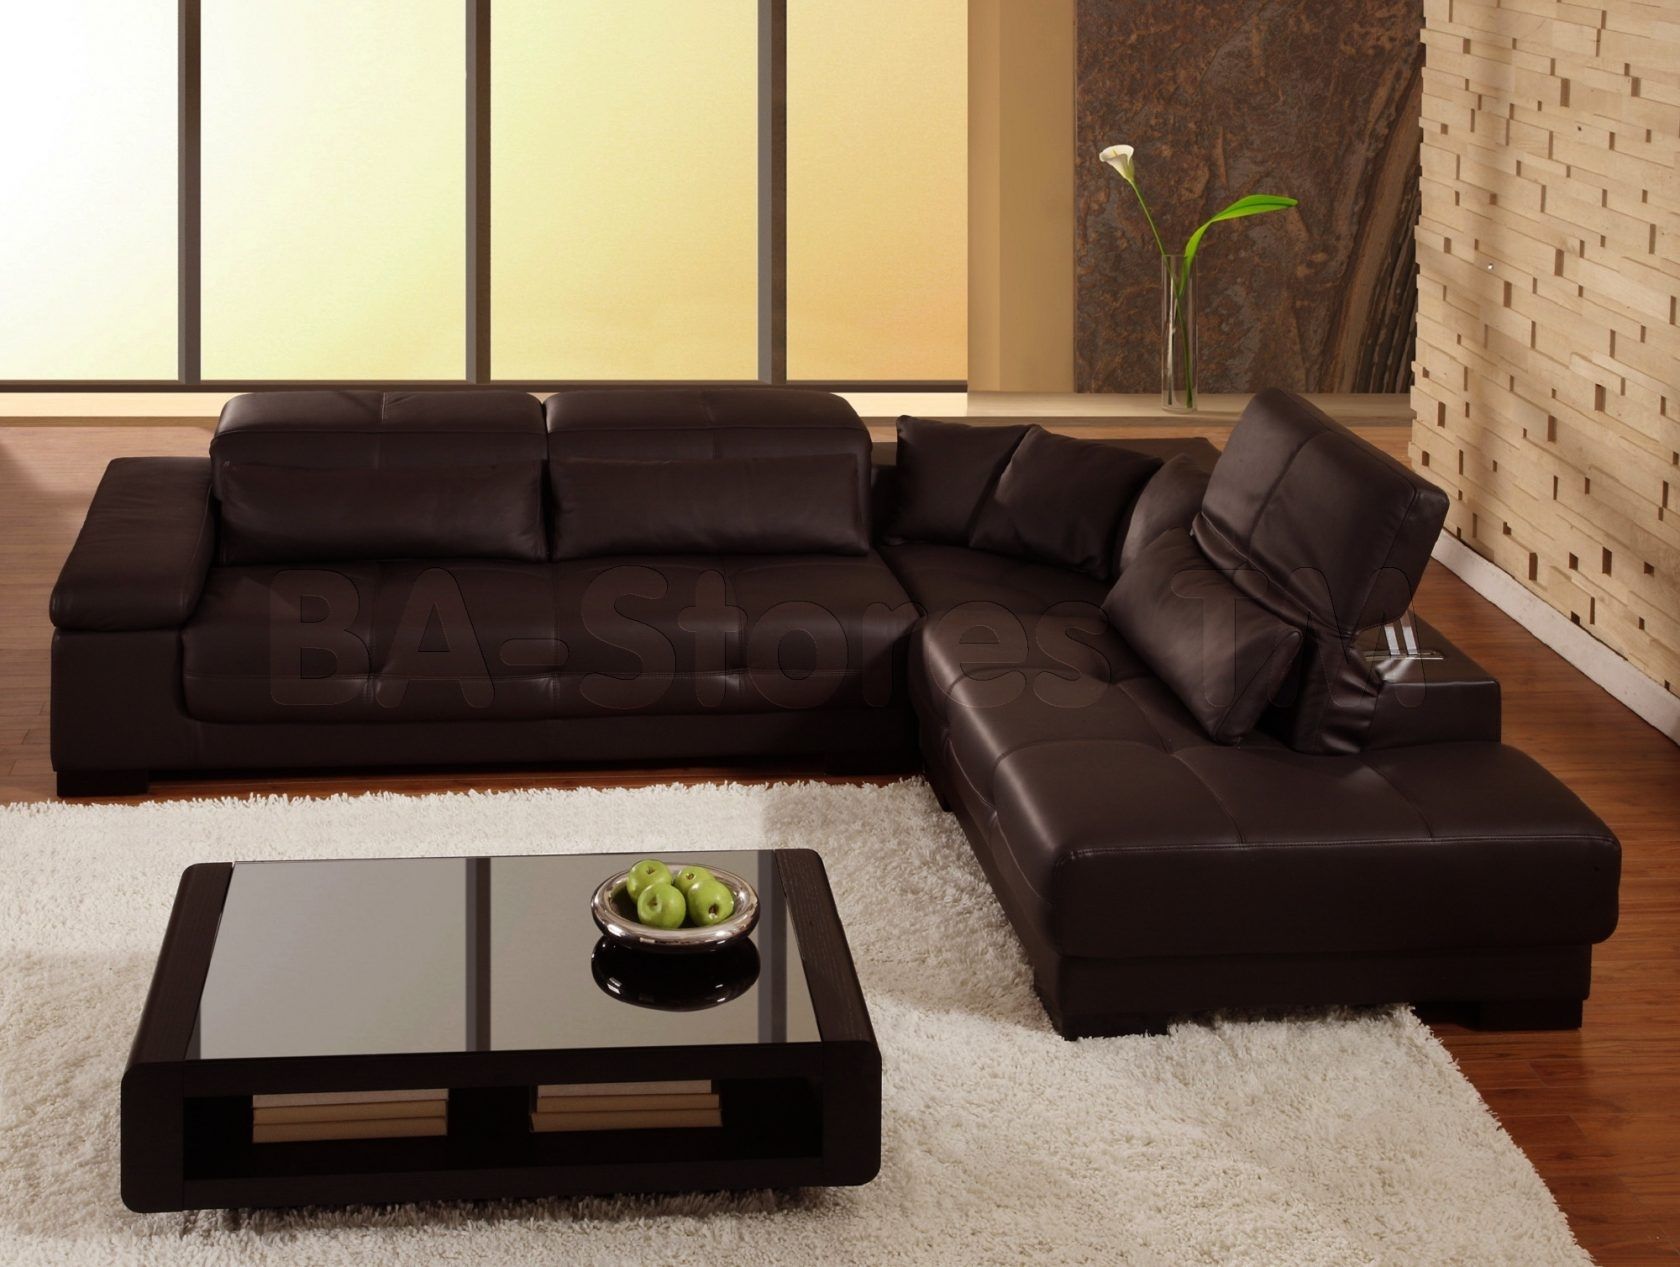 Glamorous Brown Leather Sectional Sofa Clearance 15 For Sectional For Raleigh Nc Sectional Sofas (View 1 of 10)